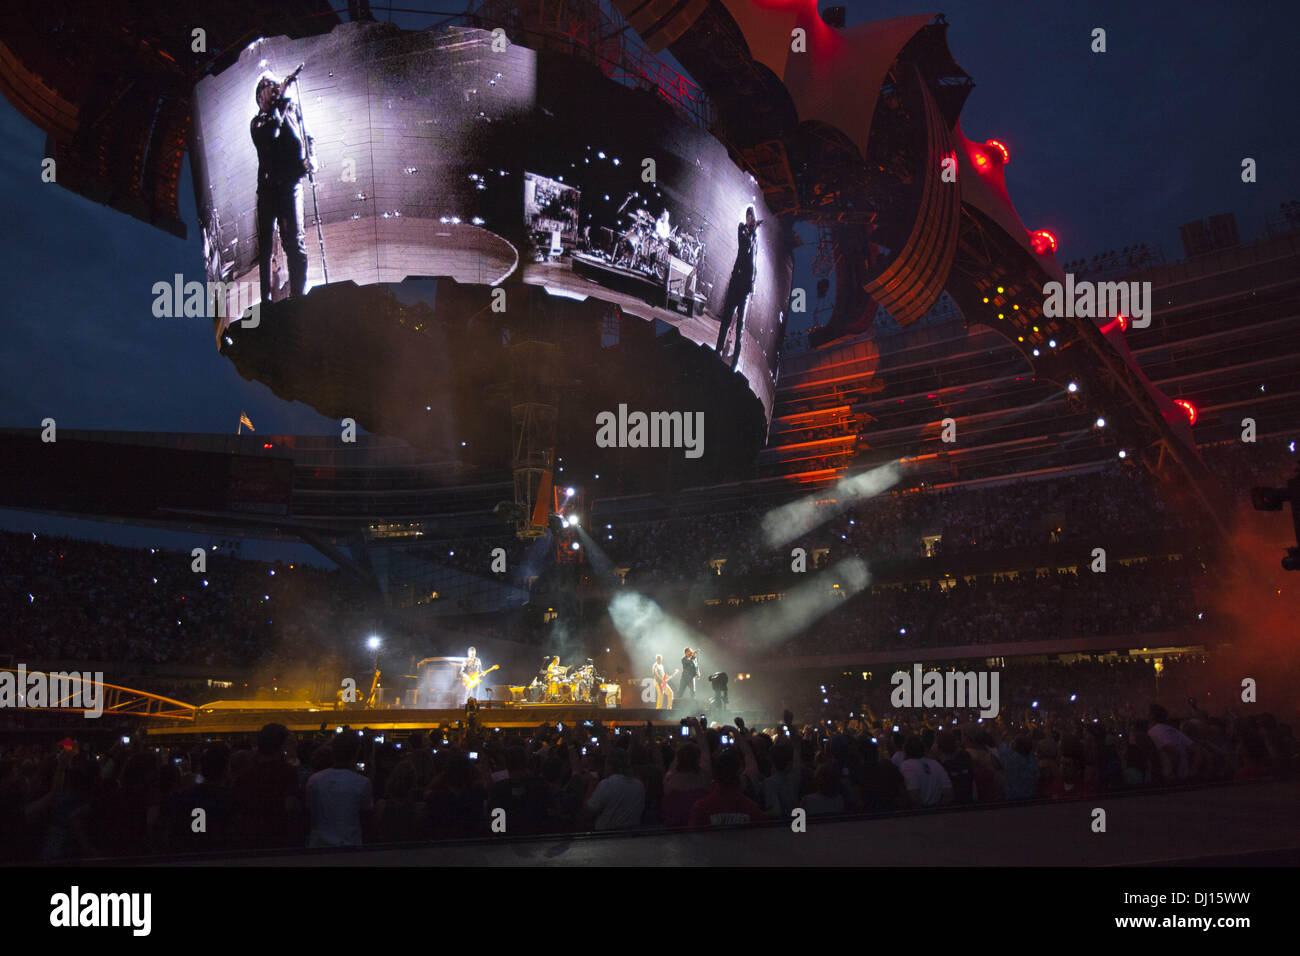 Chicago, Illinois, USA. 5th July, 2011. U2 performs on 360 Tour at Soldier Field in Chicago, Illinois © Daniel DeSlover/ZUMAPRESS.com/Alamy Live News Stock Photo